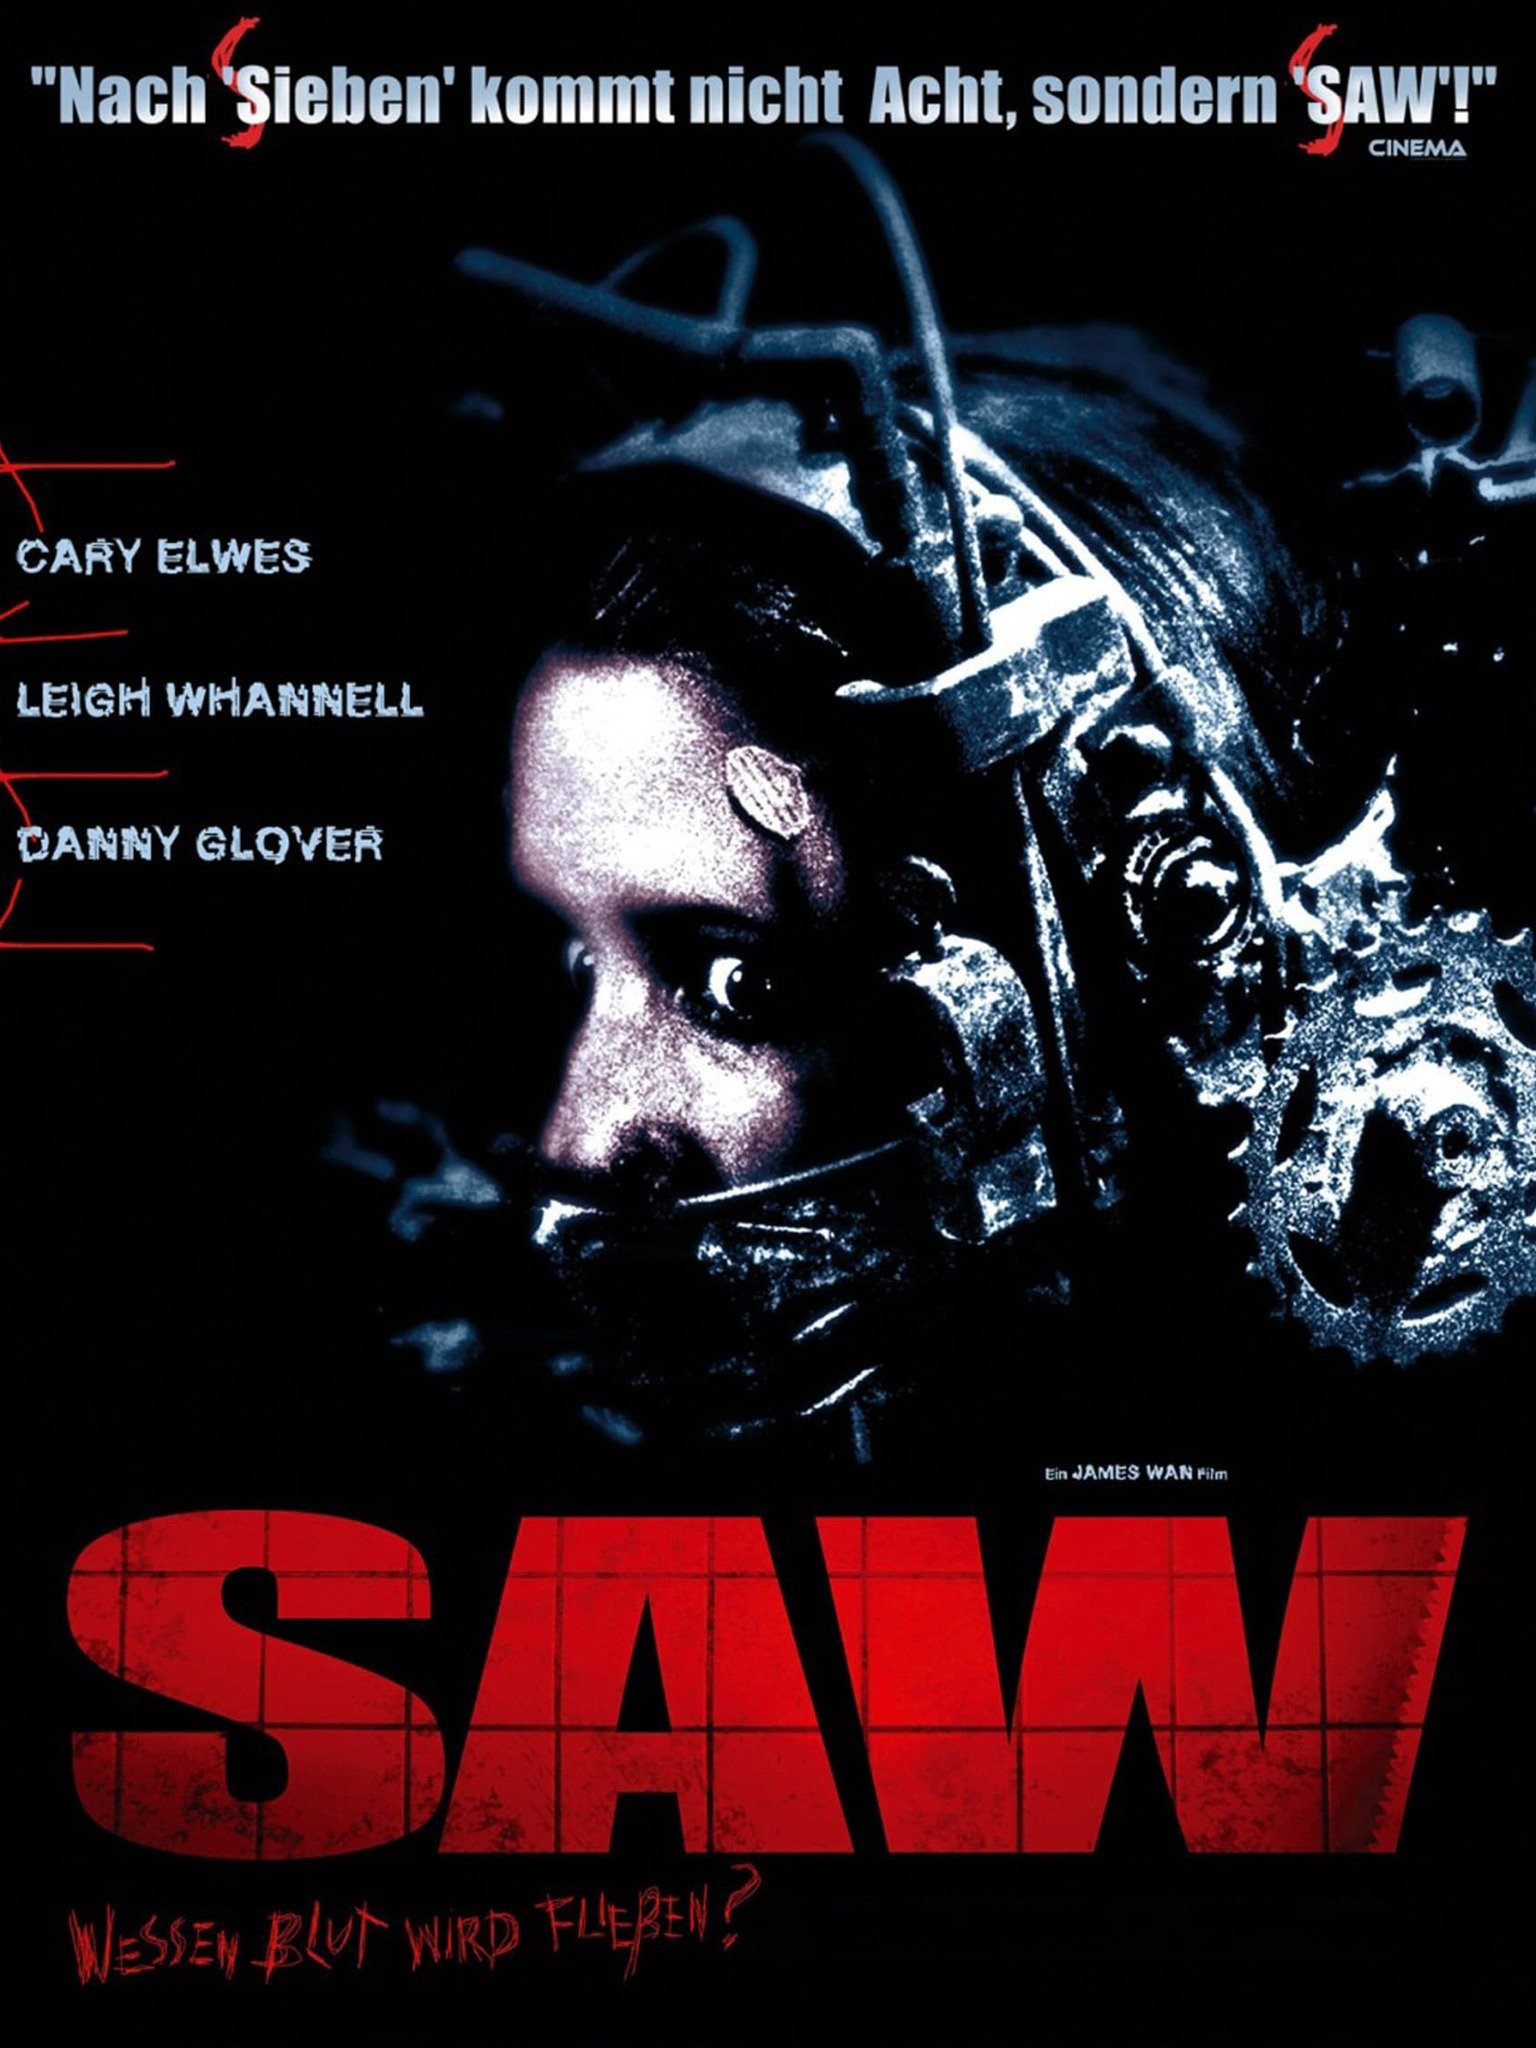 Saw X review - the strongest Saw sequel to date